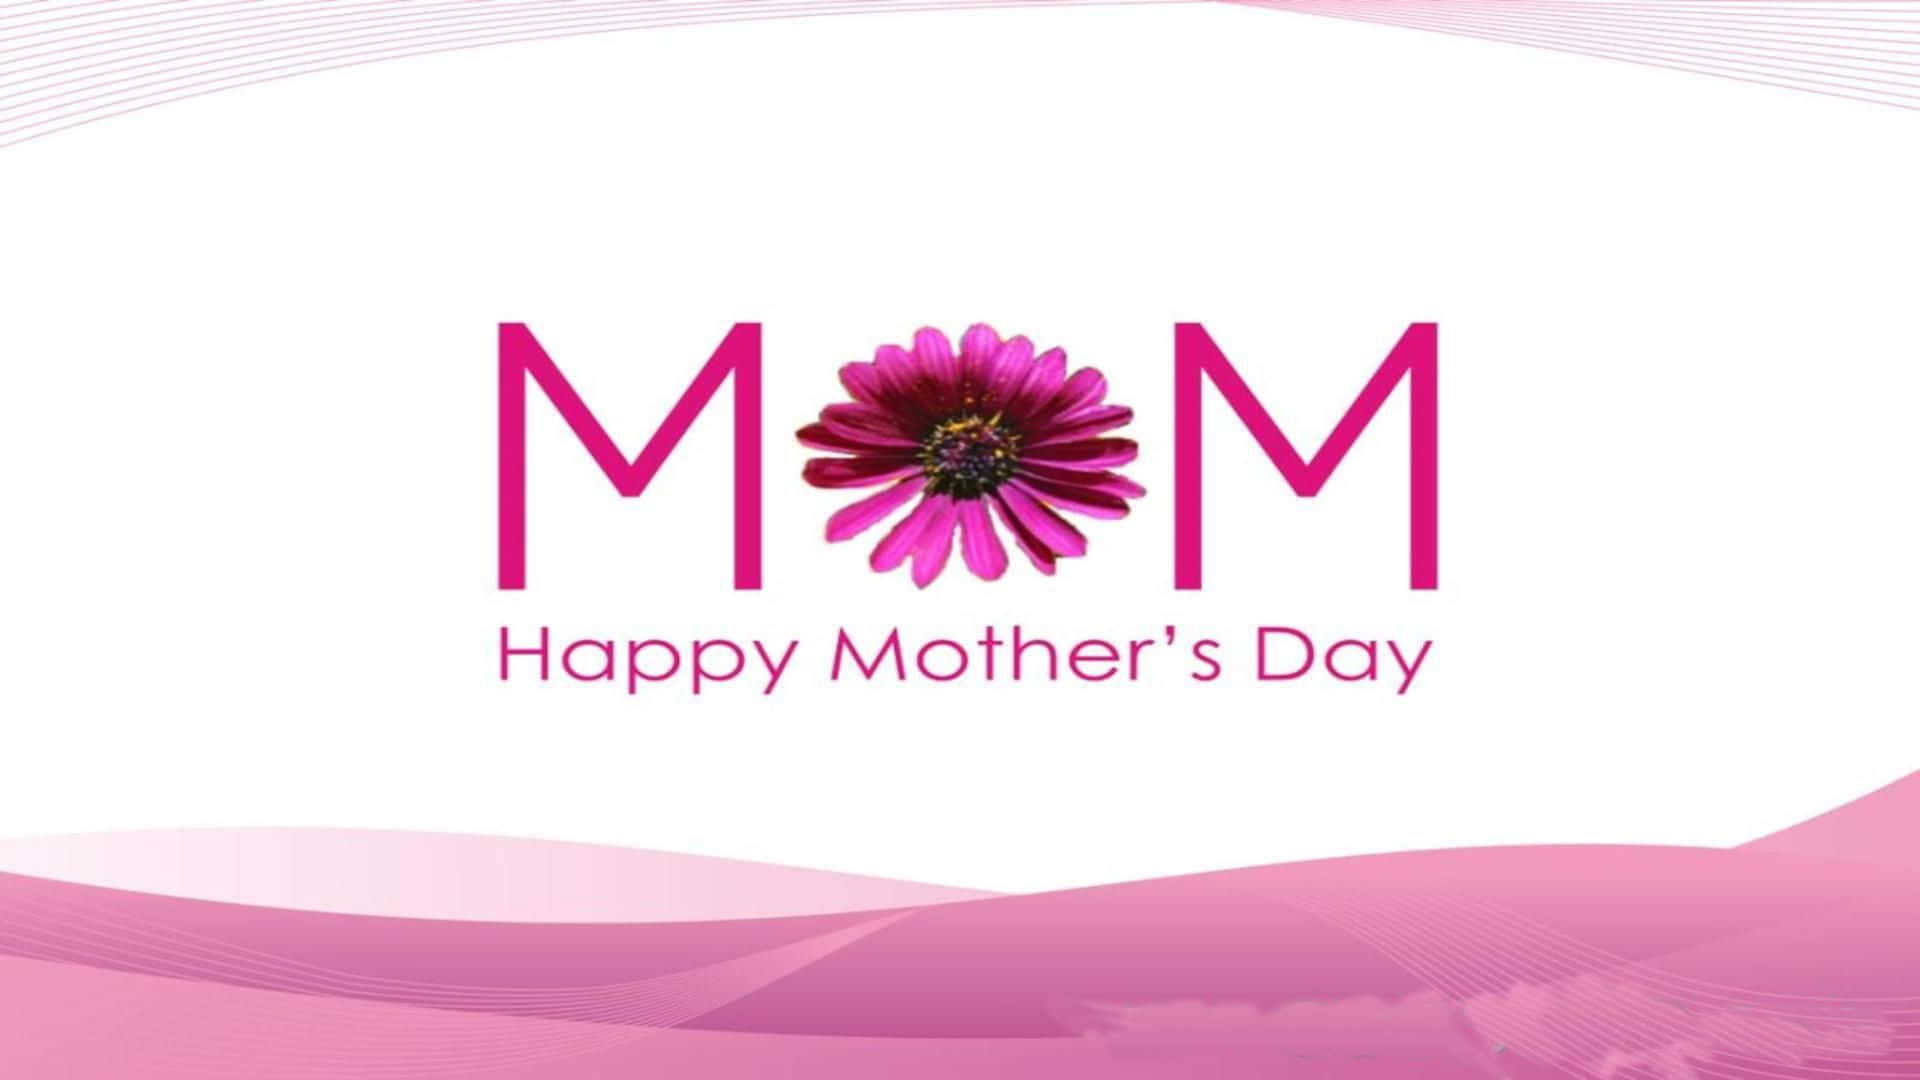 “Celebrating the Amazing Moms around the World this Happy Mother’s Day!”